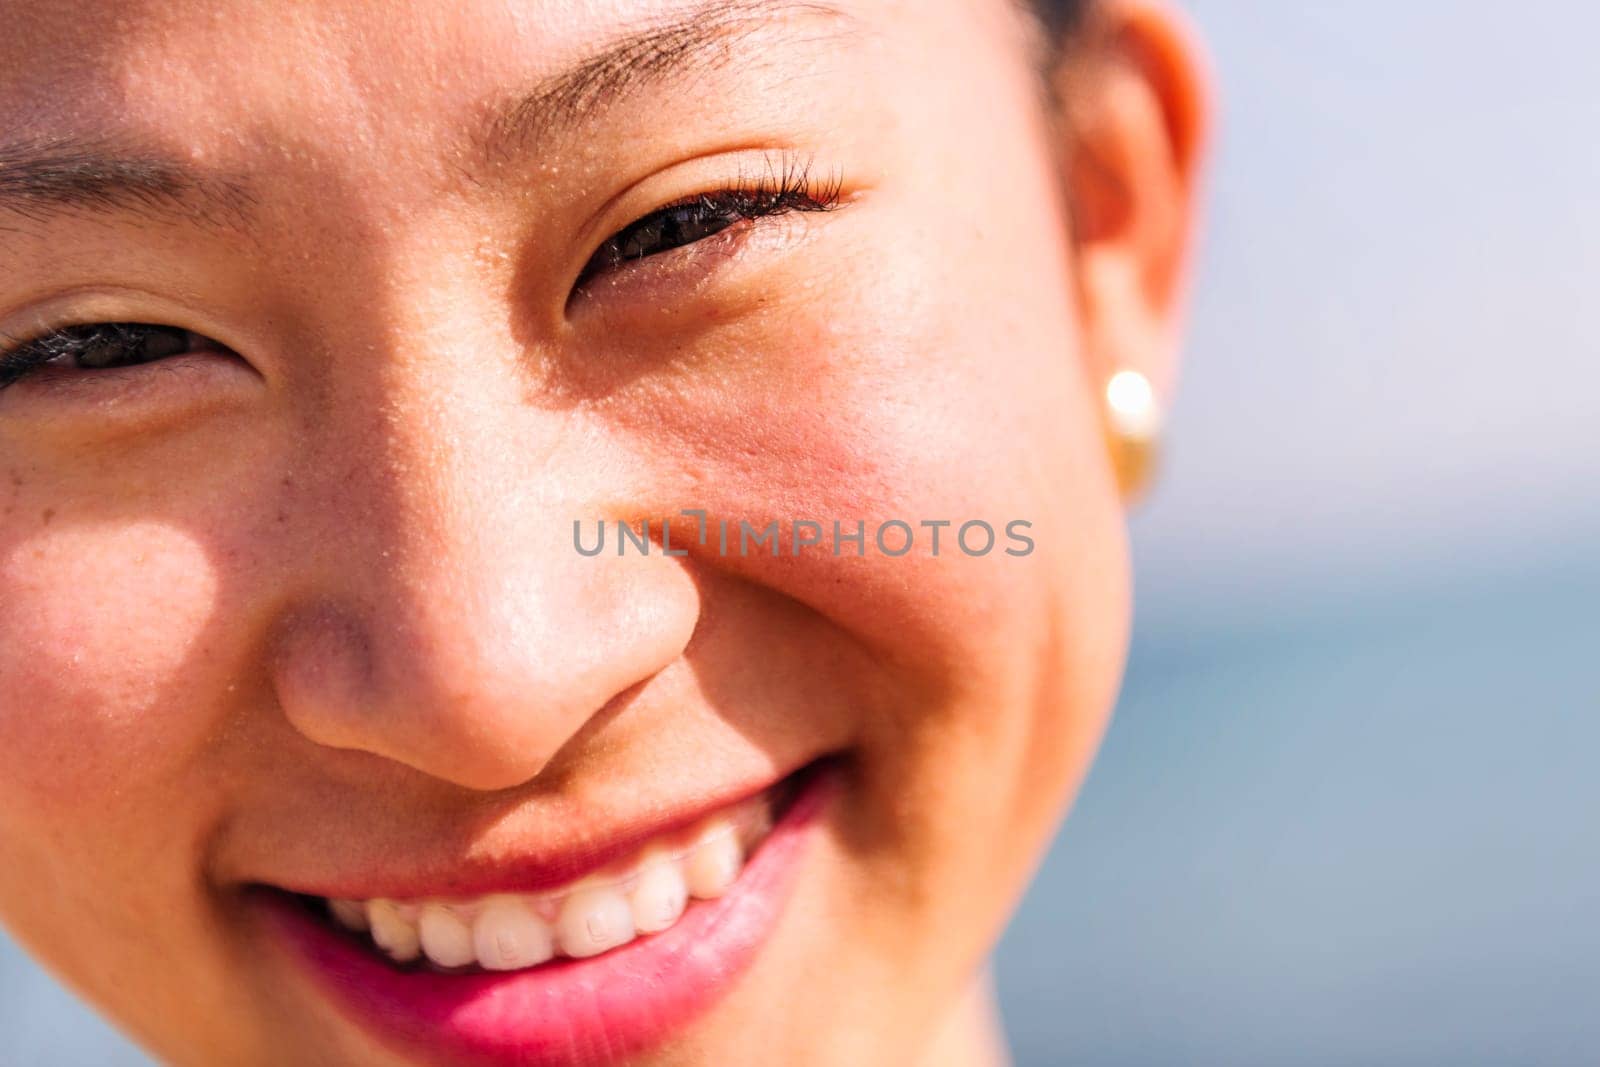 portrait of a woman with invisible braces smiling by raulmelldo